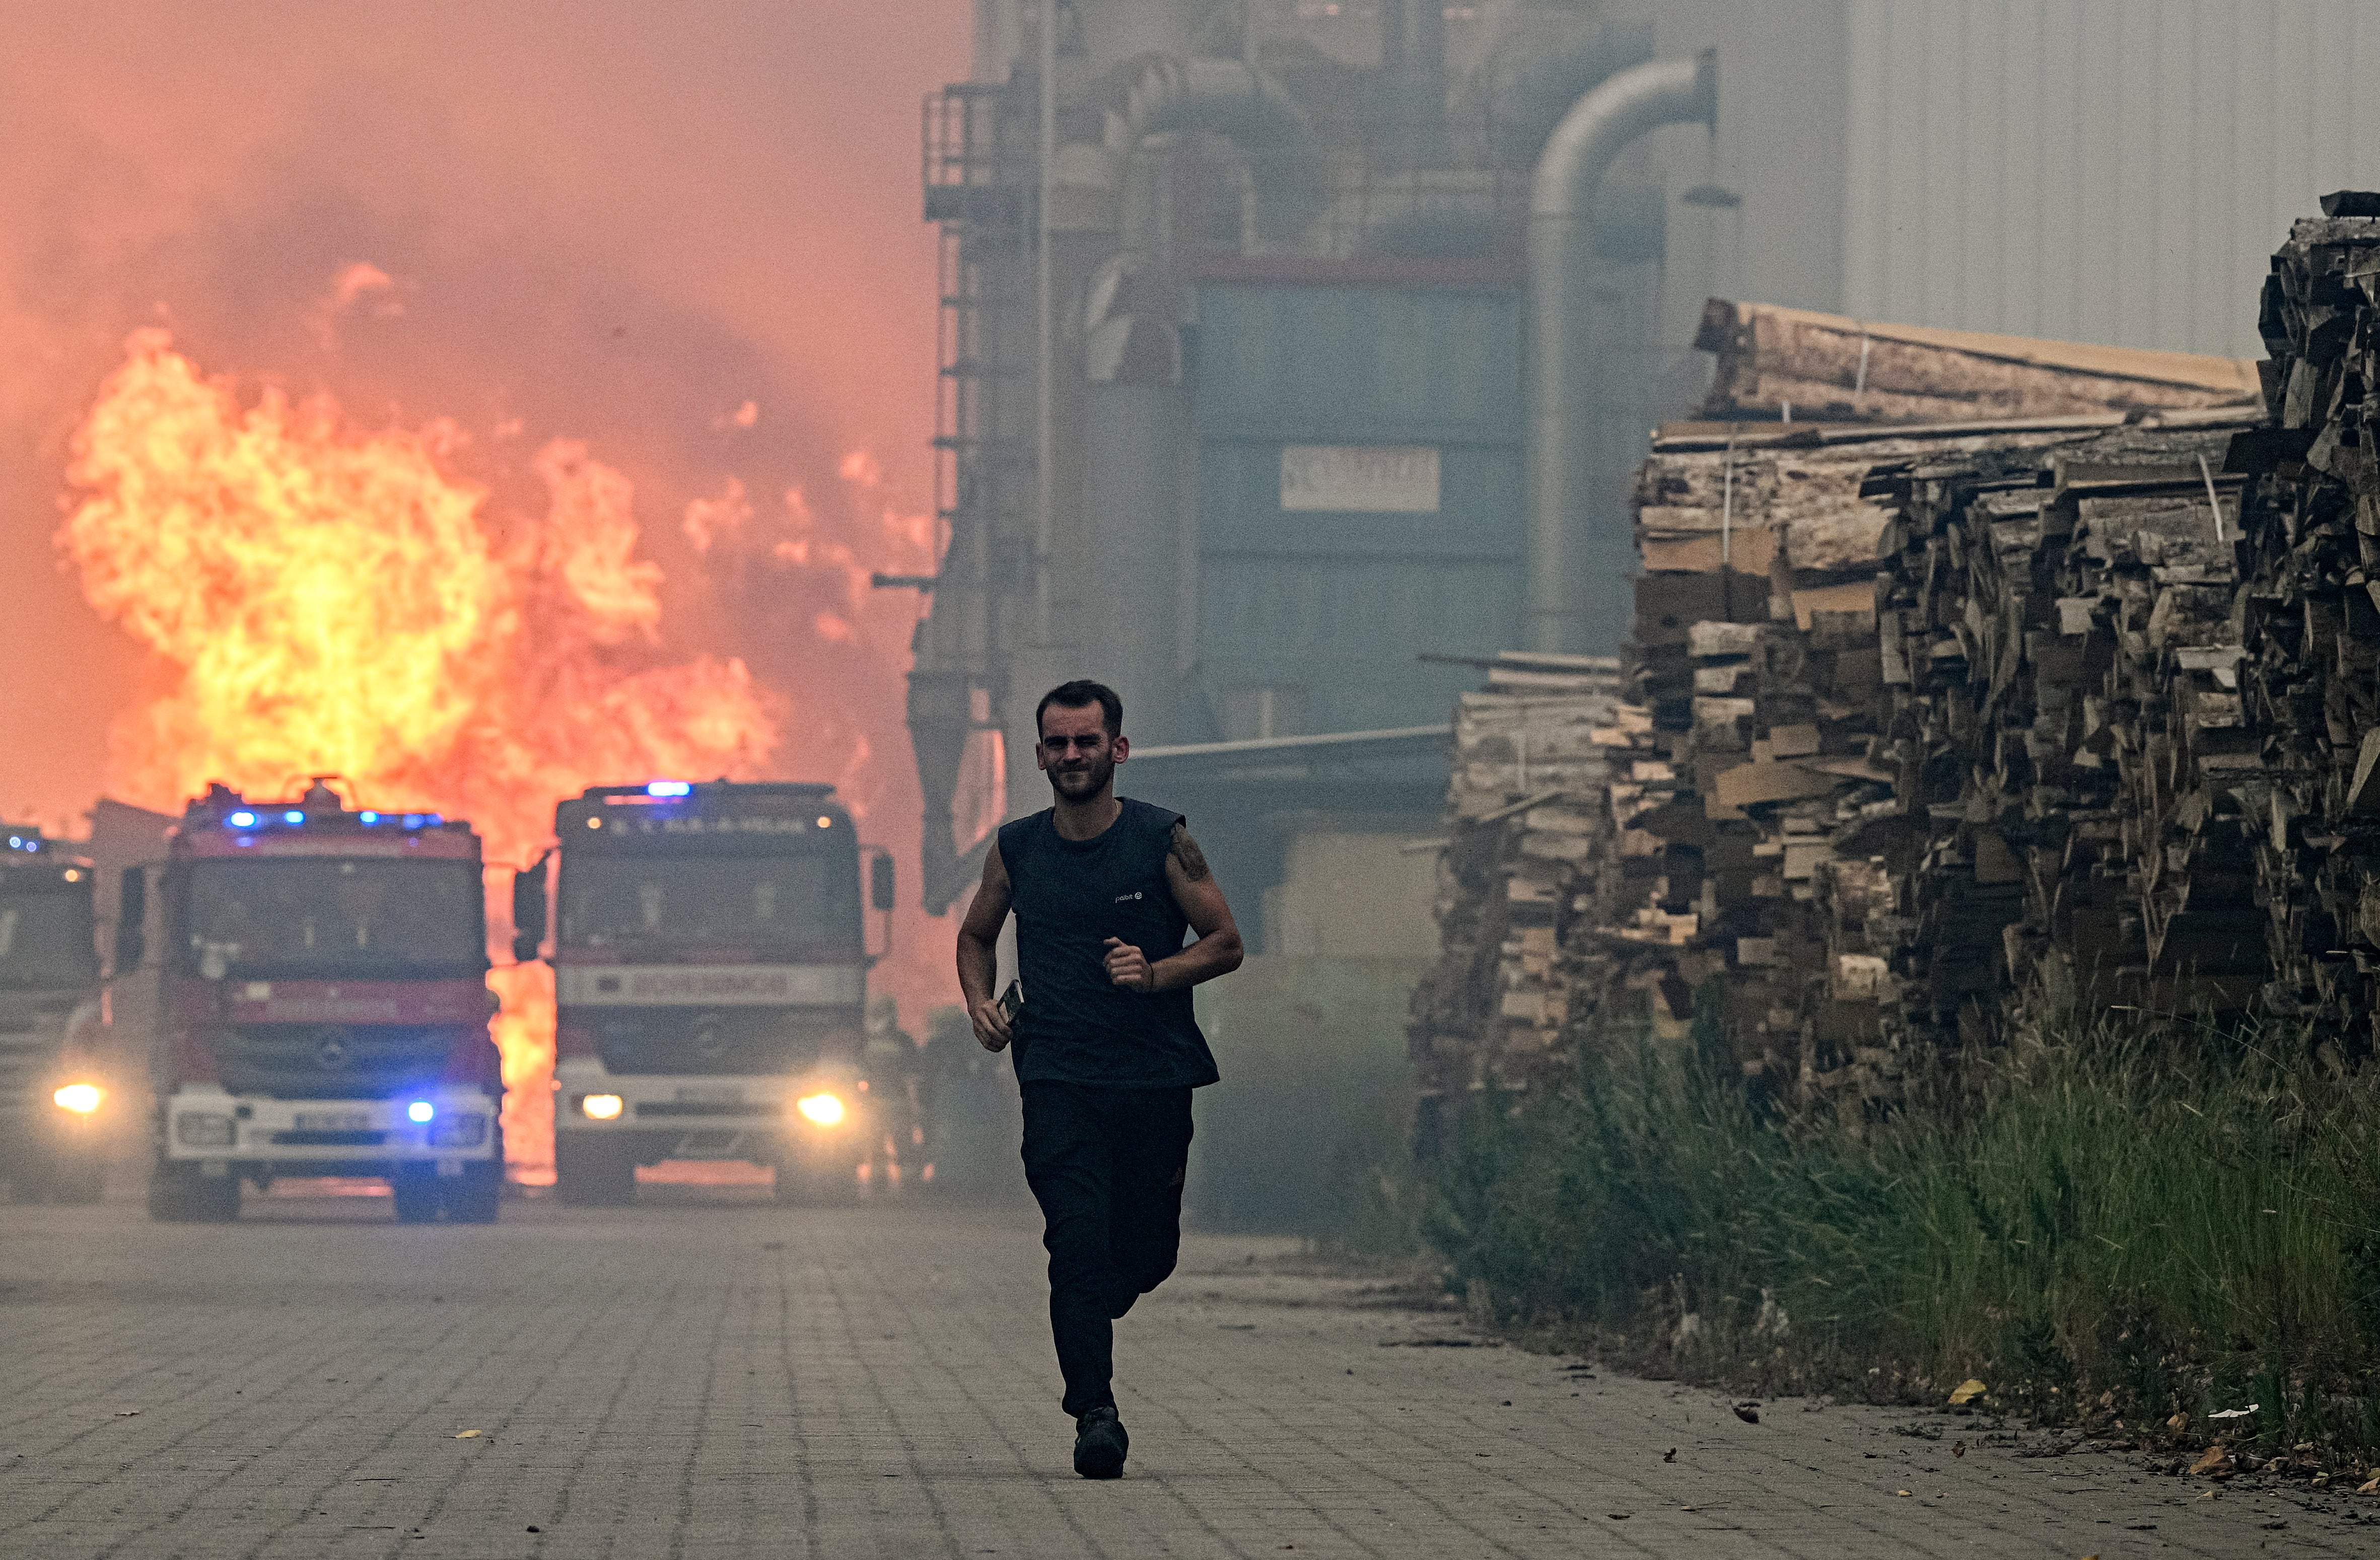 A lumber factory worker runs from a fire that hit his factory in Albergaria a Velha, Portugal on July 13, 2022.  (Photo: Octavio Passos, Getty Images)